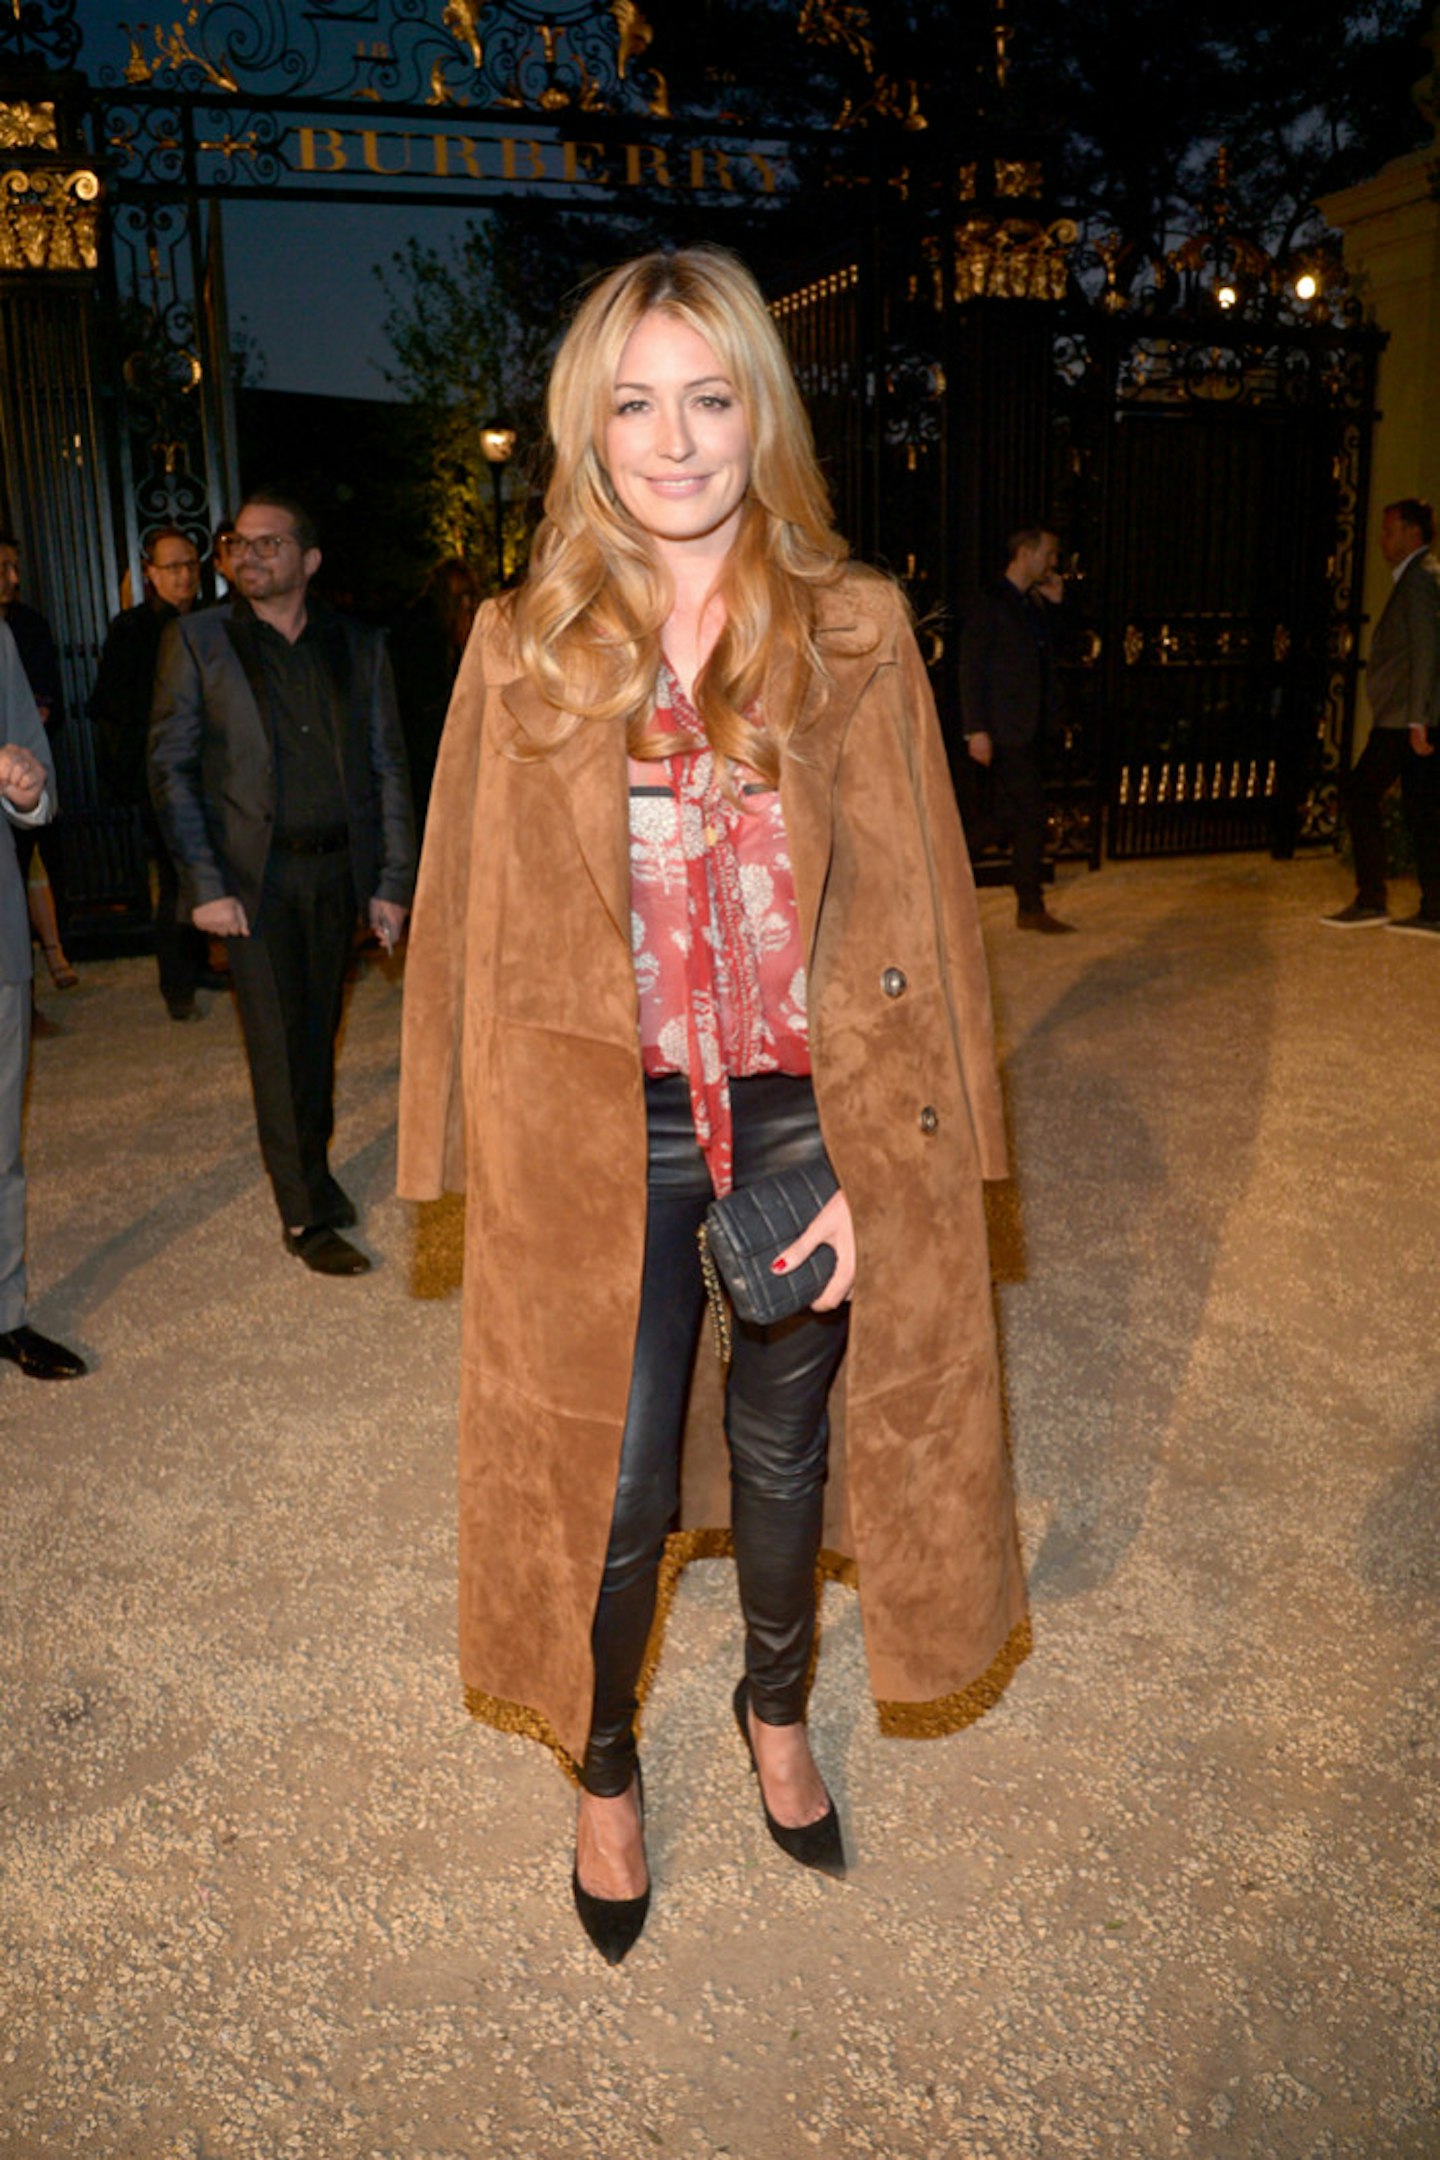 Cat Deeley at the Burberry _London in Los Angeles_ event